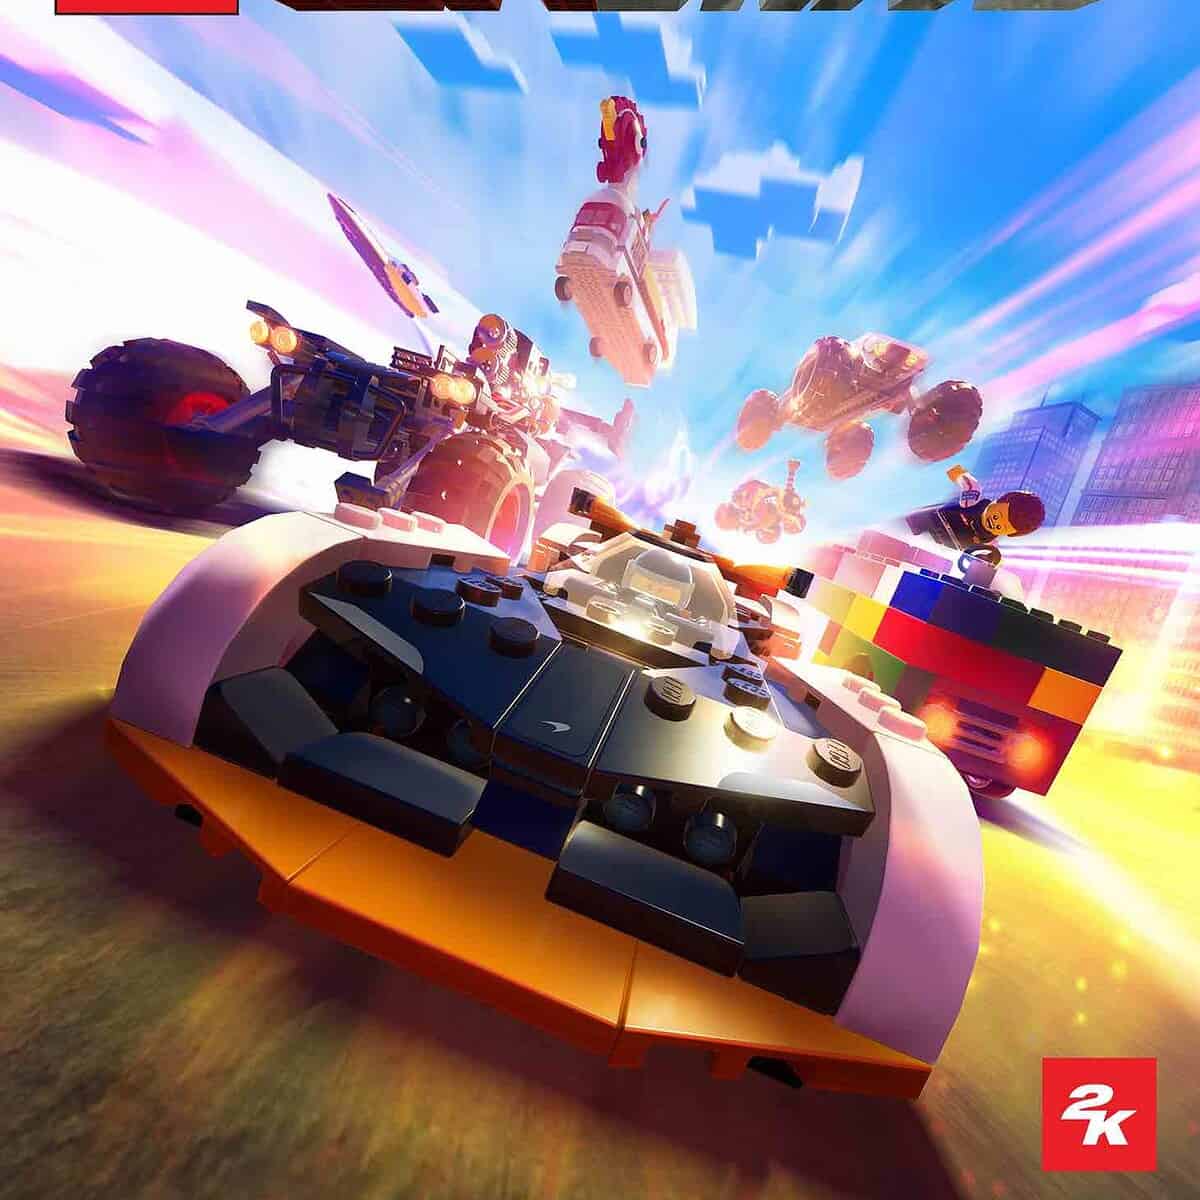 Lego 2K Drive Release Date, Editions, Trailer and more